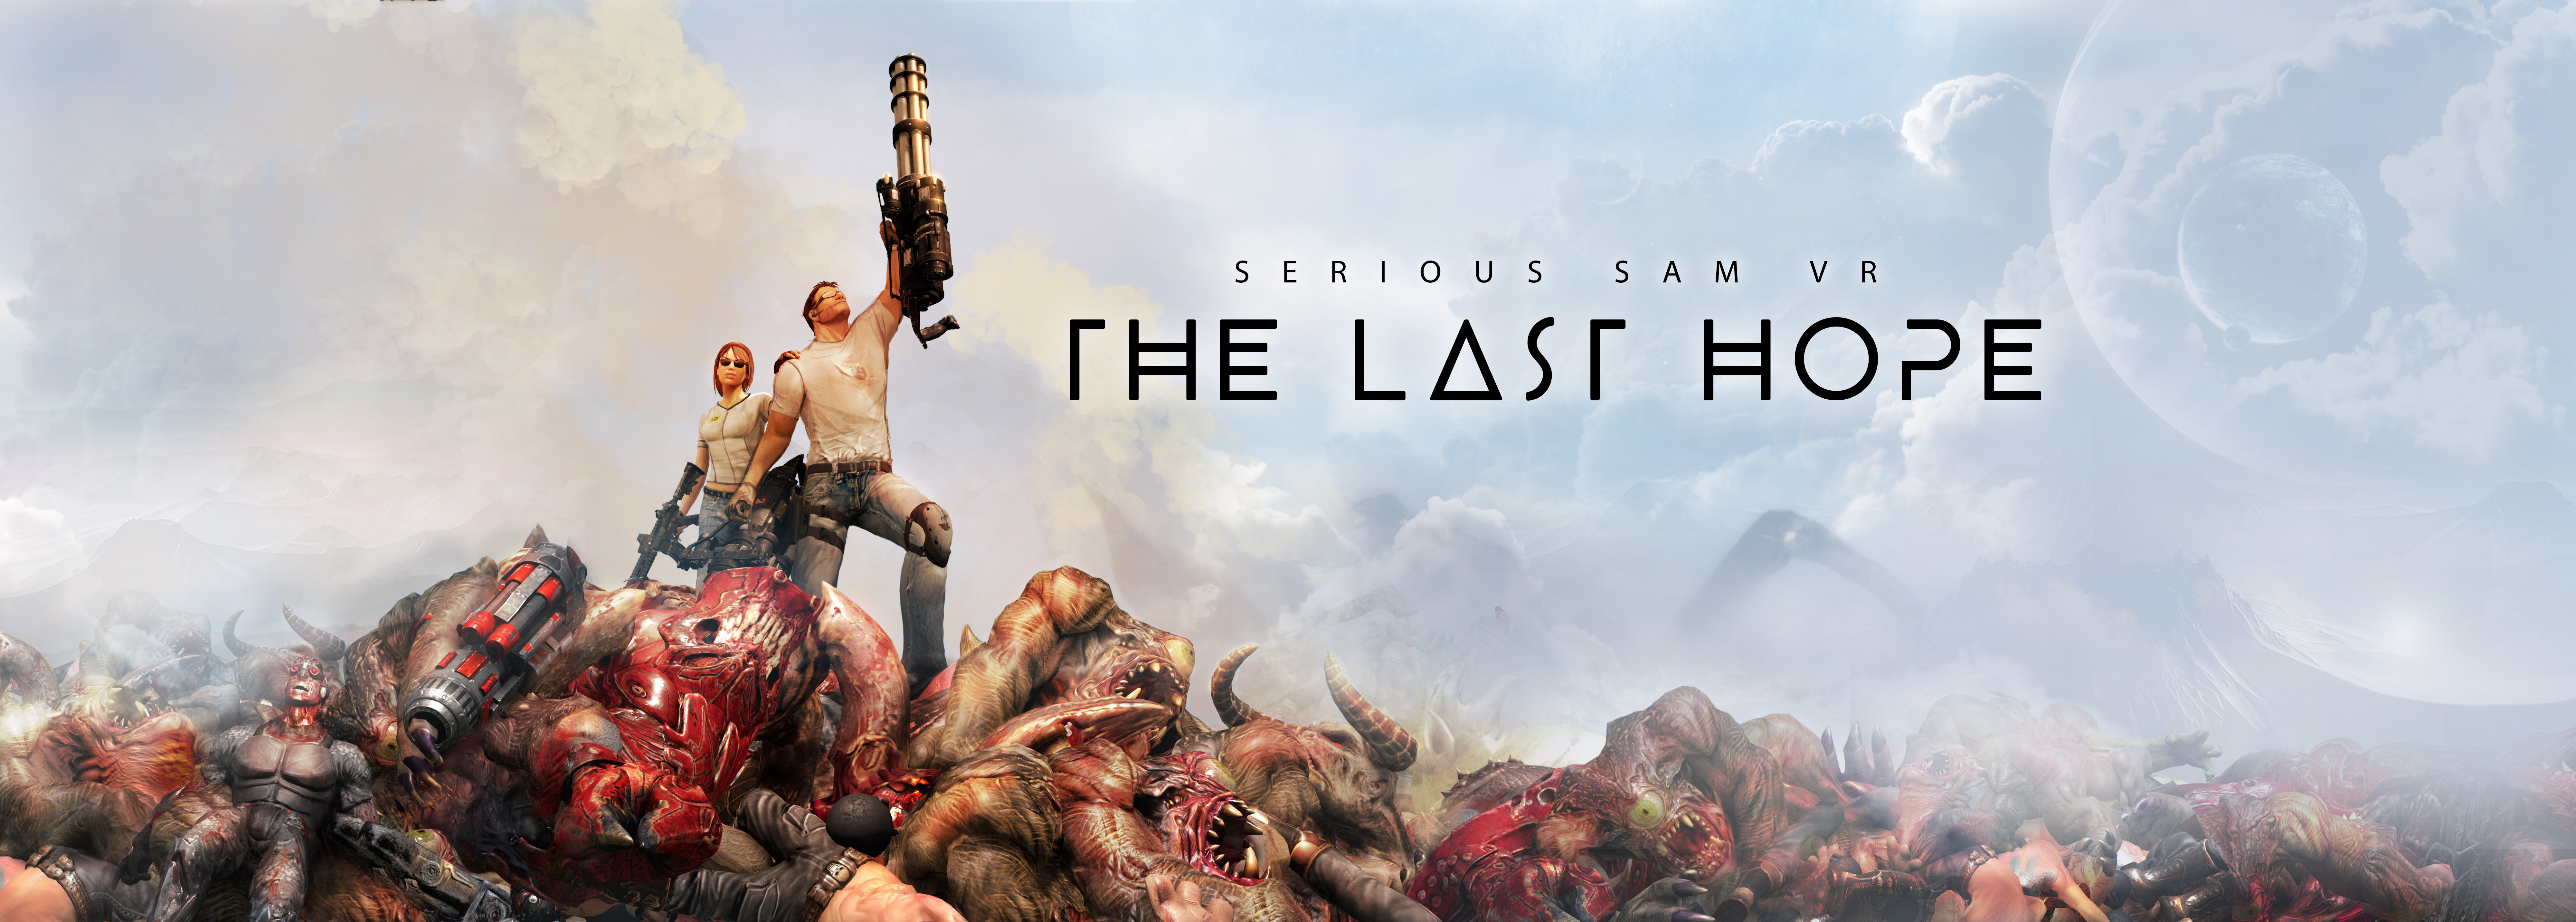 the last hope vr download free